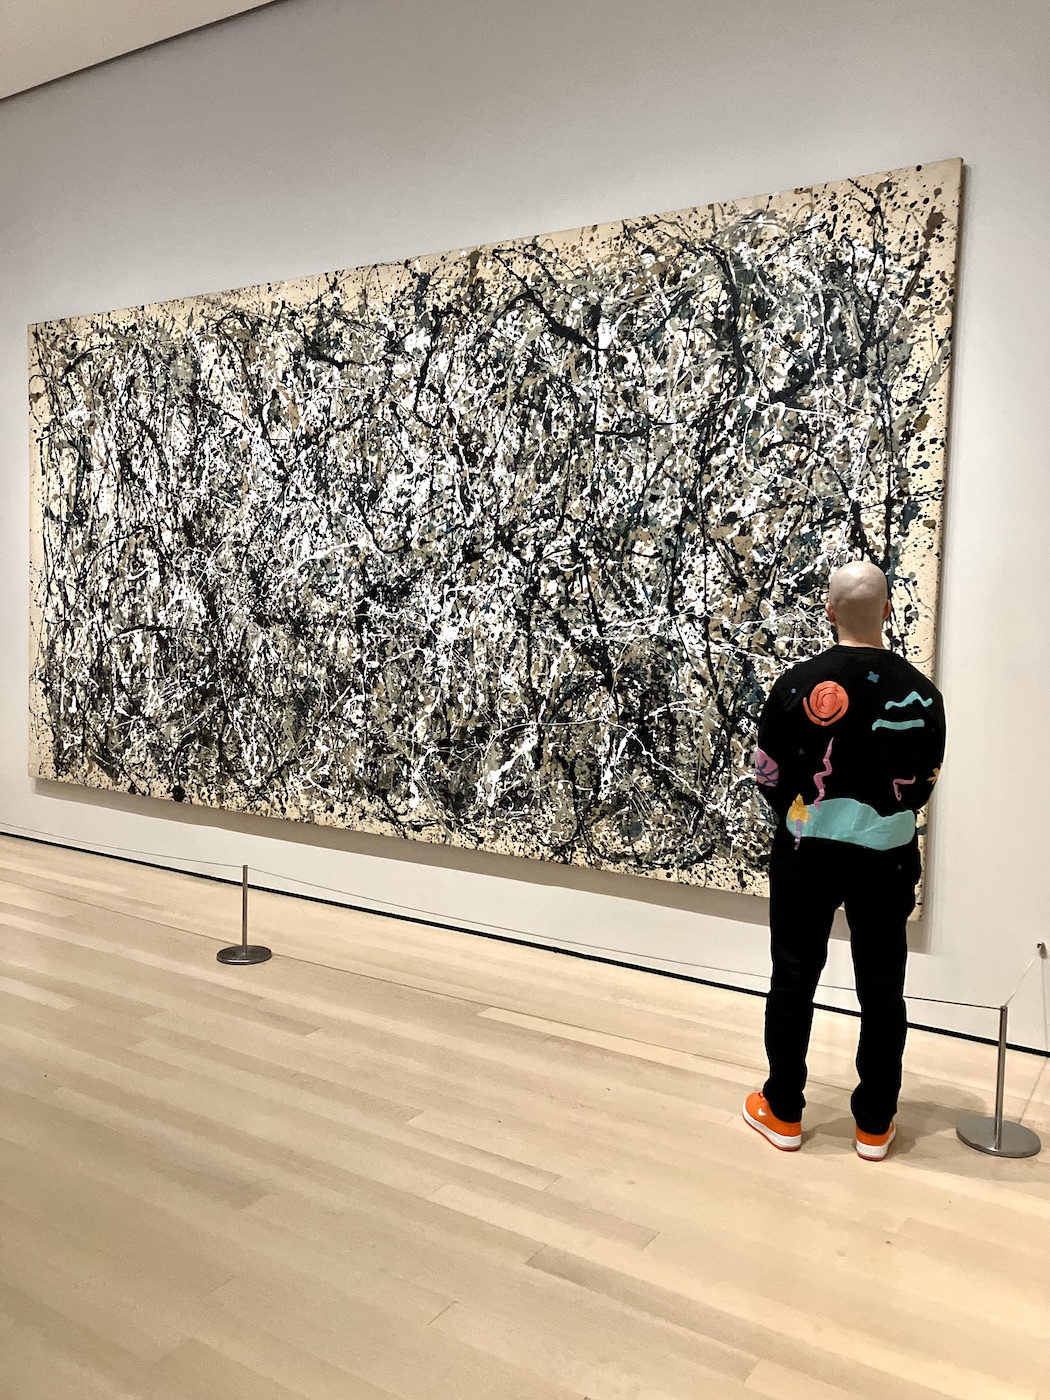 Kerwin next to an original Jackson Pollock painting, One: Number 31, 1950 at the Museum of Modern Art, New York